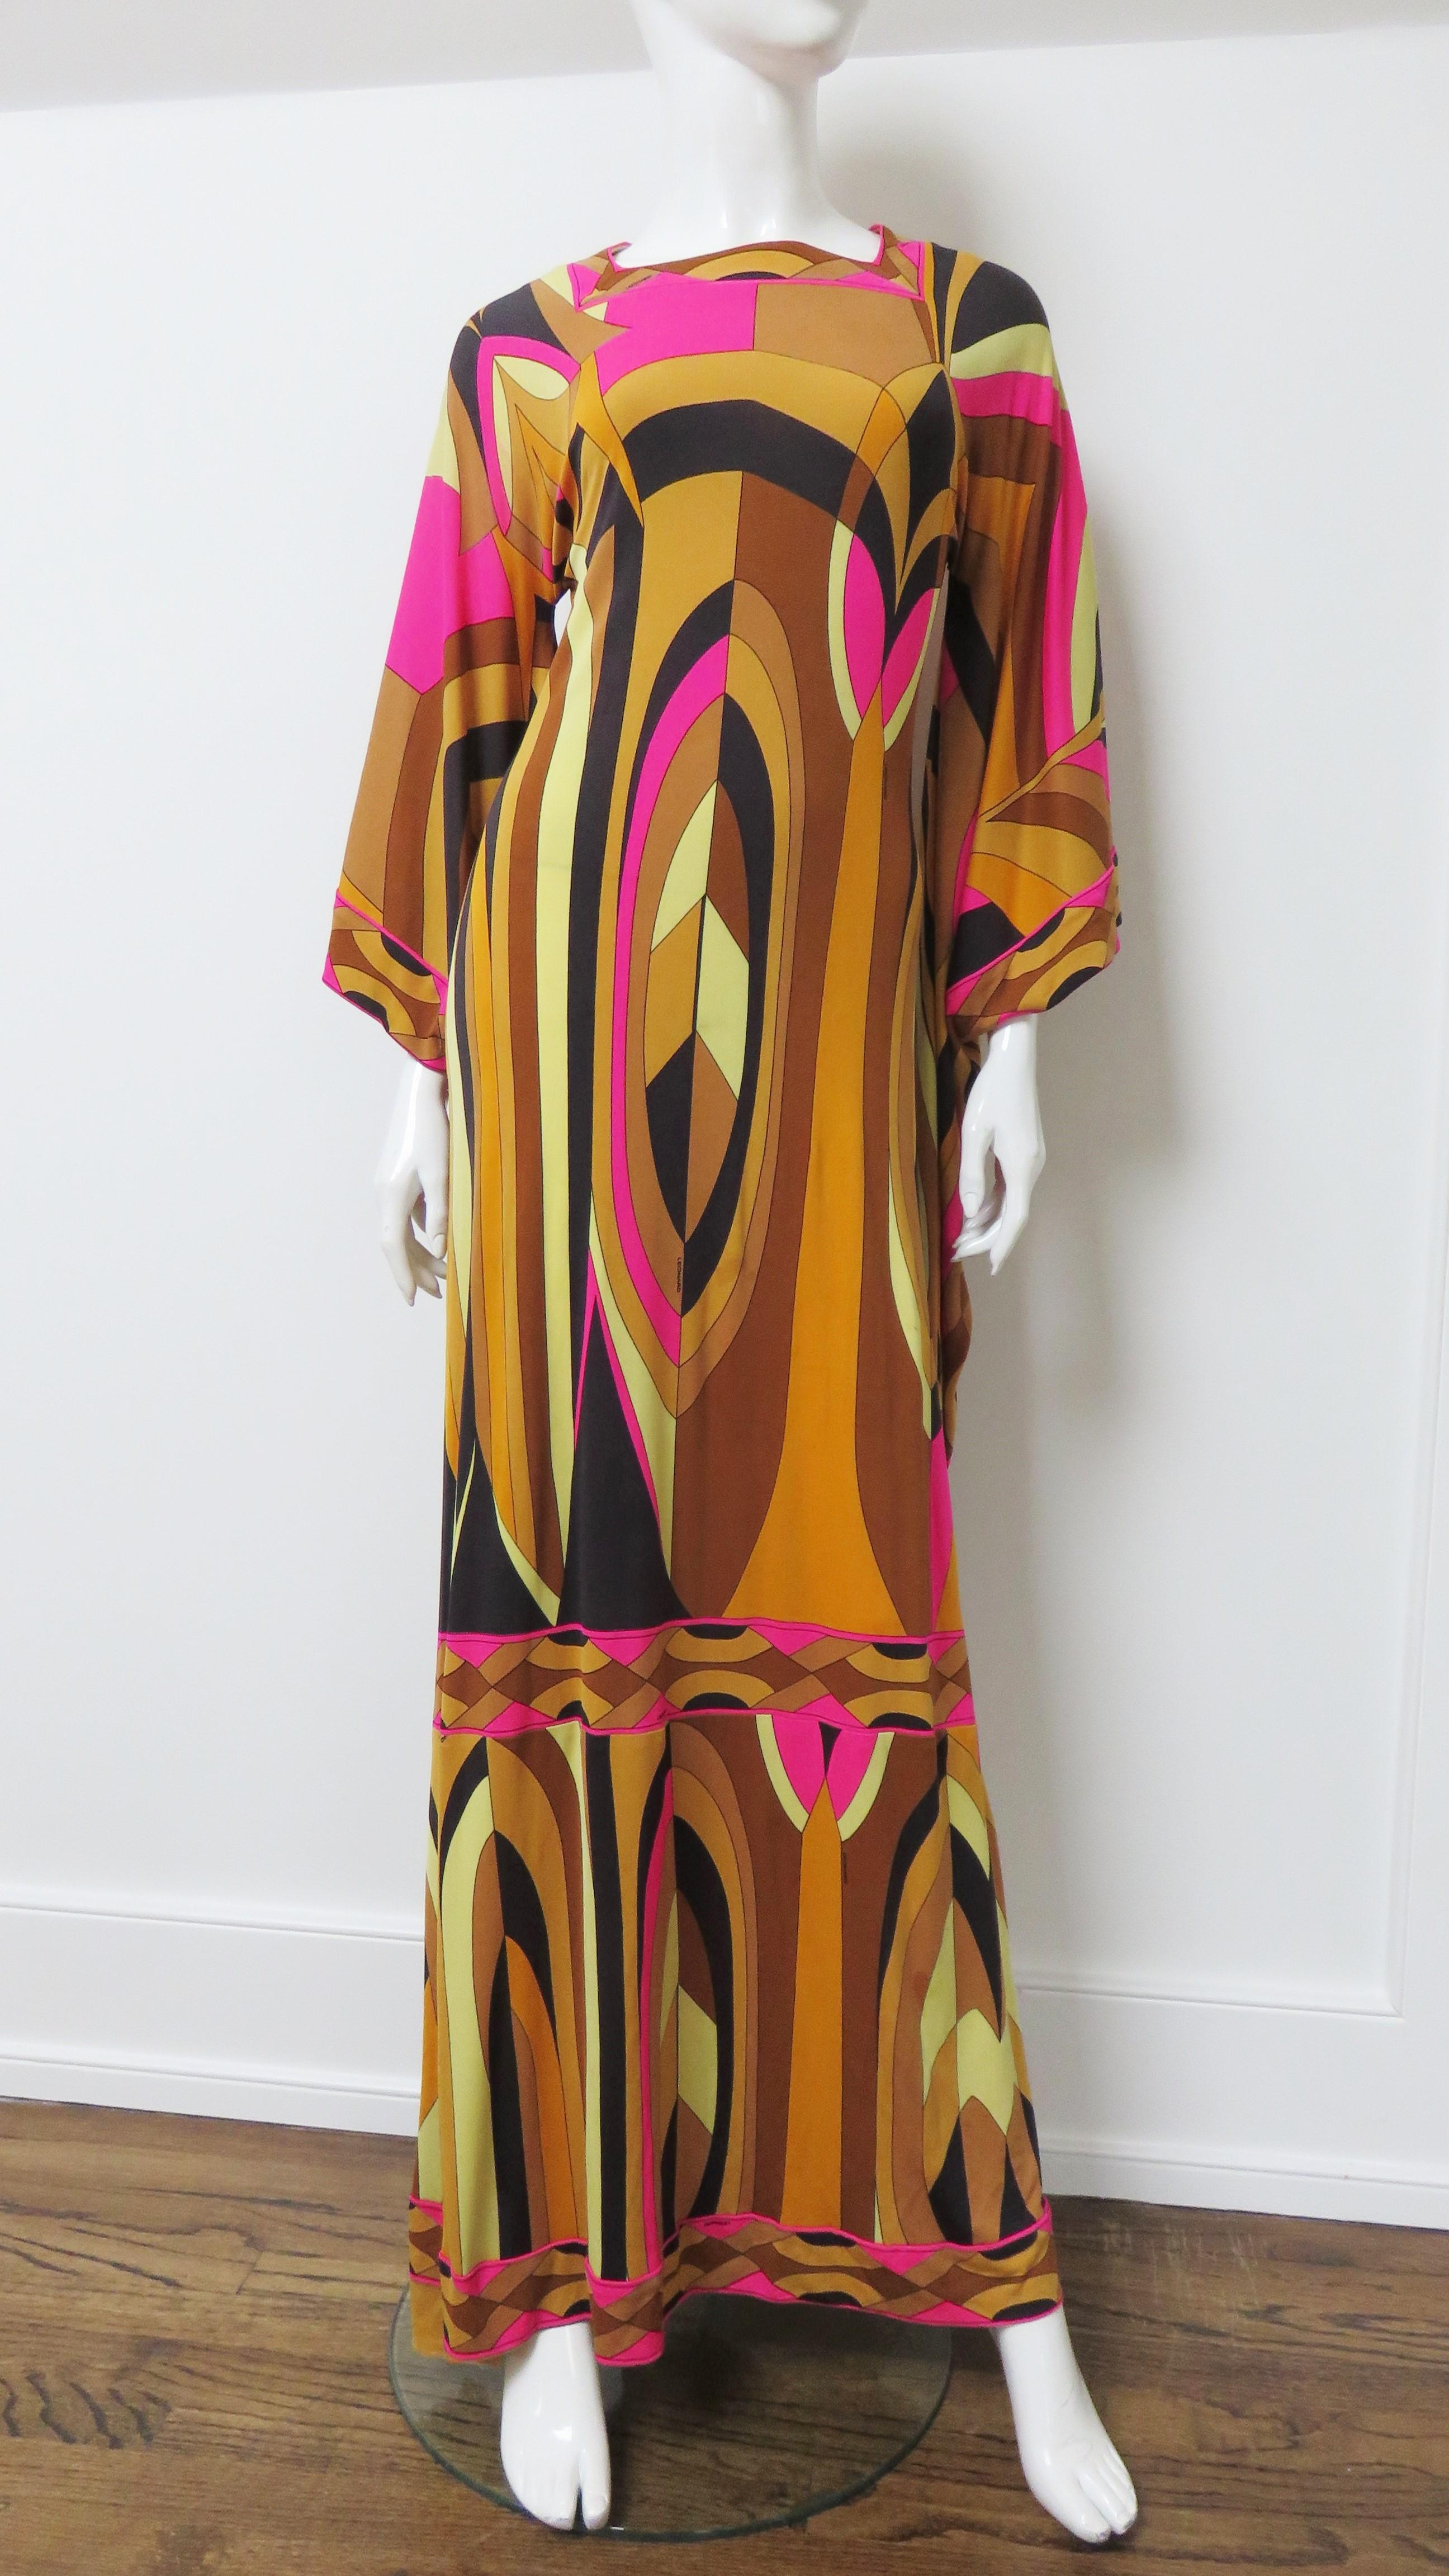 A fabulous angel sleeve long dress from Leonard in a bold pattern of bright pink, tan, black an yellow fine silk jersey.  It has a square neckline and long draping sleeves through to below the knees. It is semi fitted skimming the body.
Fits Extra